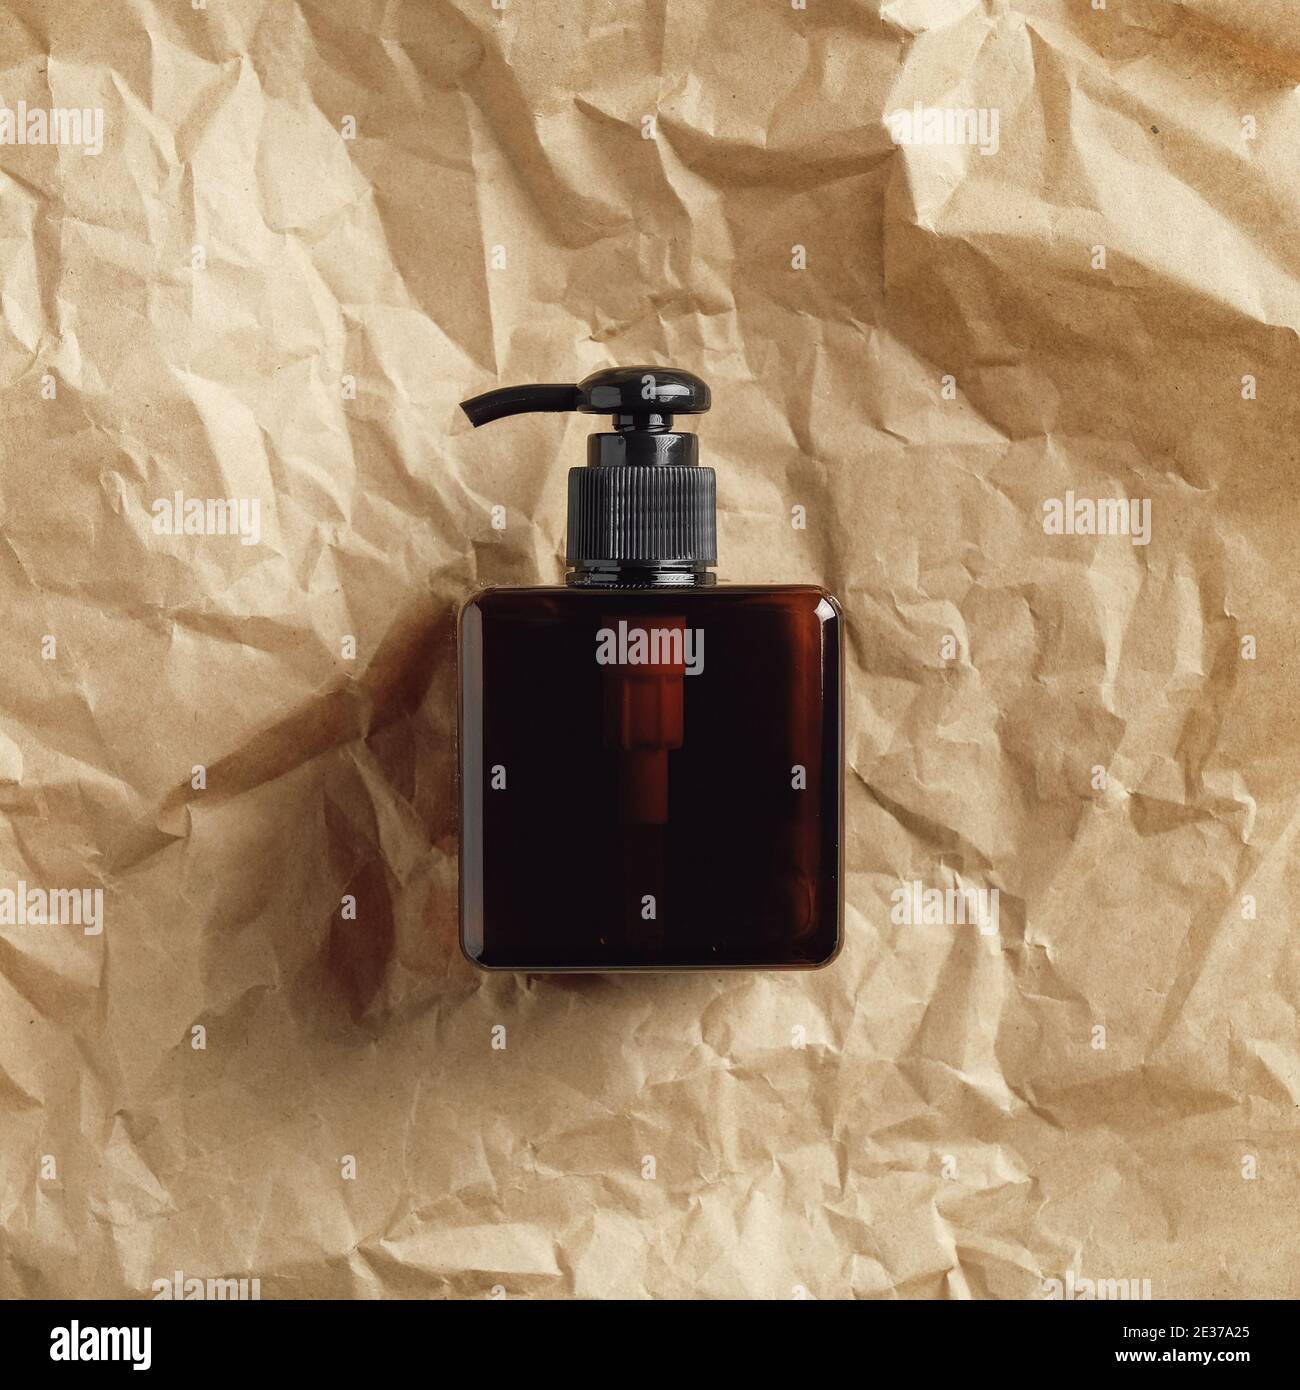 https://c8.alamy.com/comp/2E37A25/amber-glass-dispenser-bottle-mockup-on-kraft-paper-container-for-organic-shampoo-or-soap-liquid-beauty-product-packaging-design-flat-lay-top-view-2E37A25.jpg